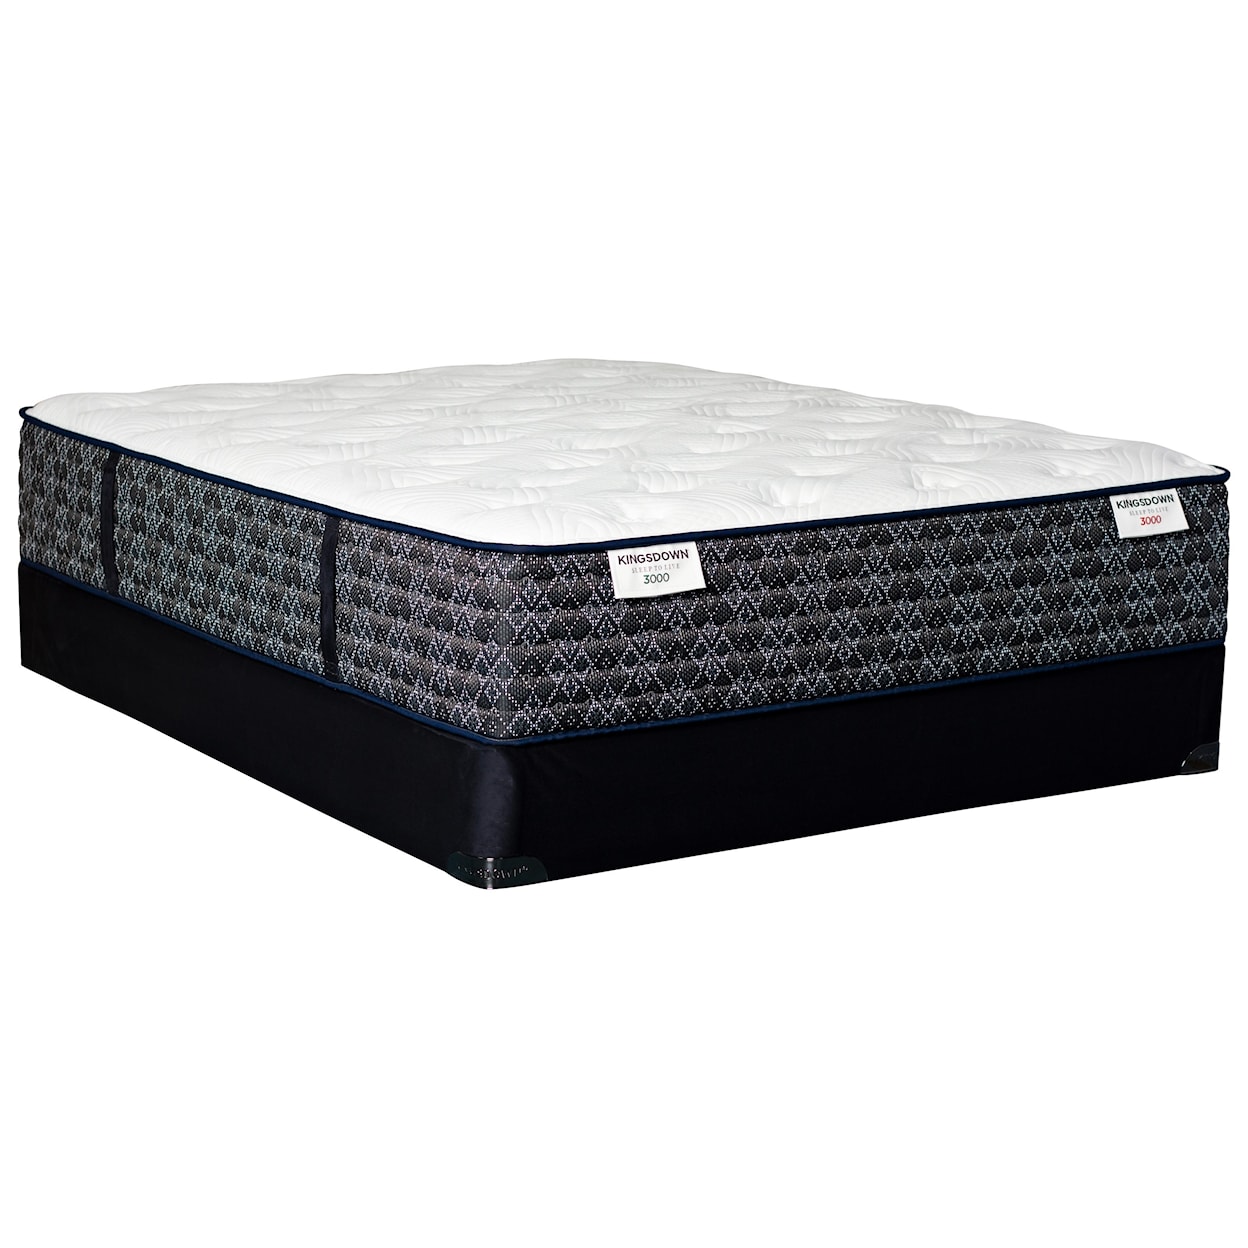 Kingsdown Sleep to Live 3000 Green Red Twin Pocketed Coil Mattress LoPro Set